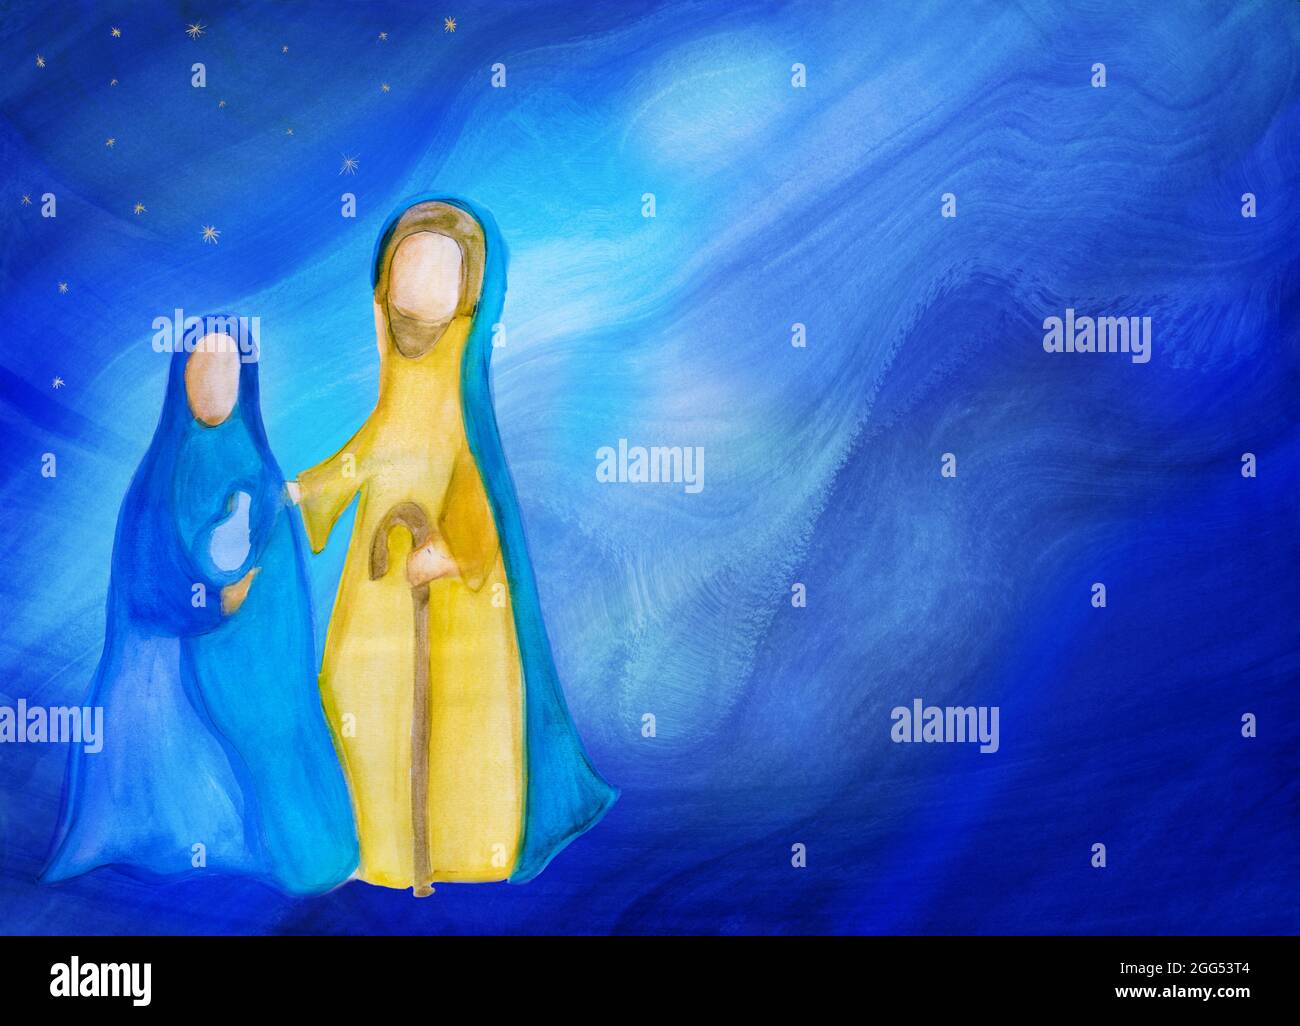 Bethlehem nativity scene. Abstract watercolor Christmas scene illustration representing the holy family with Joseph Mary and baby Jesus. Blue starry Stock Photo